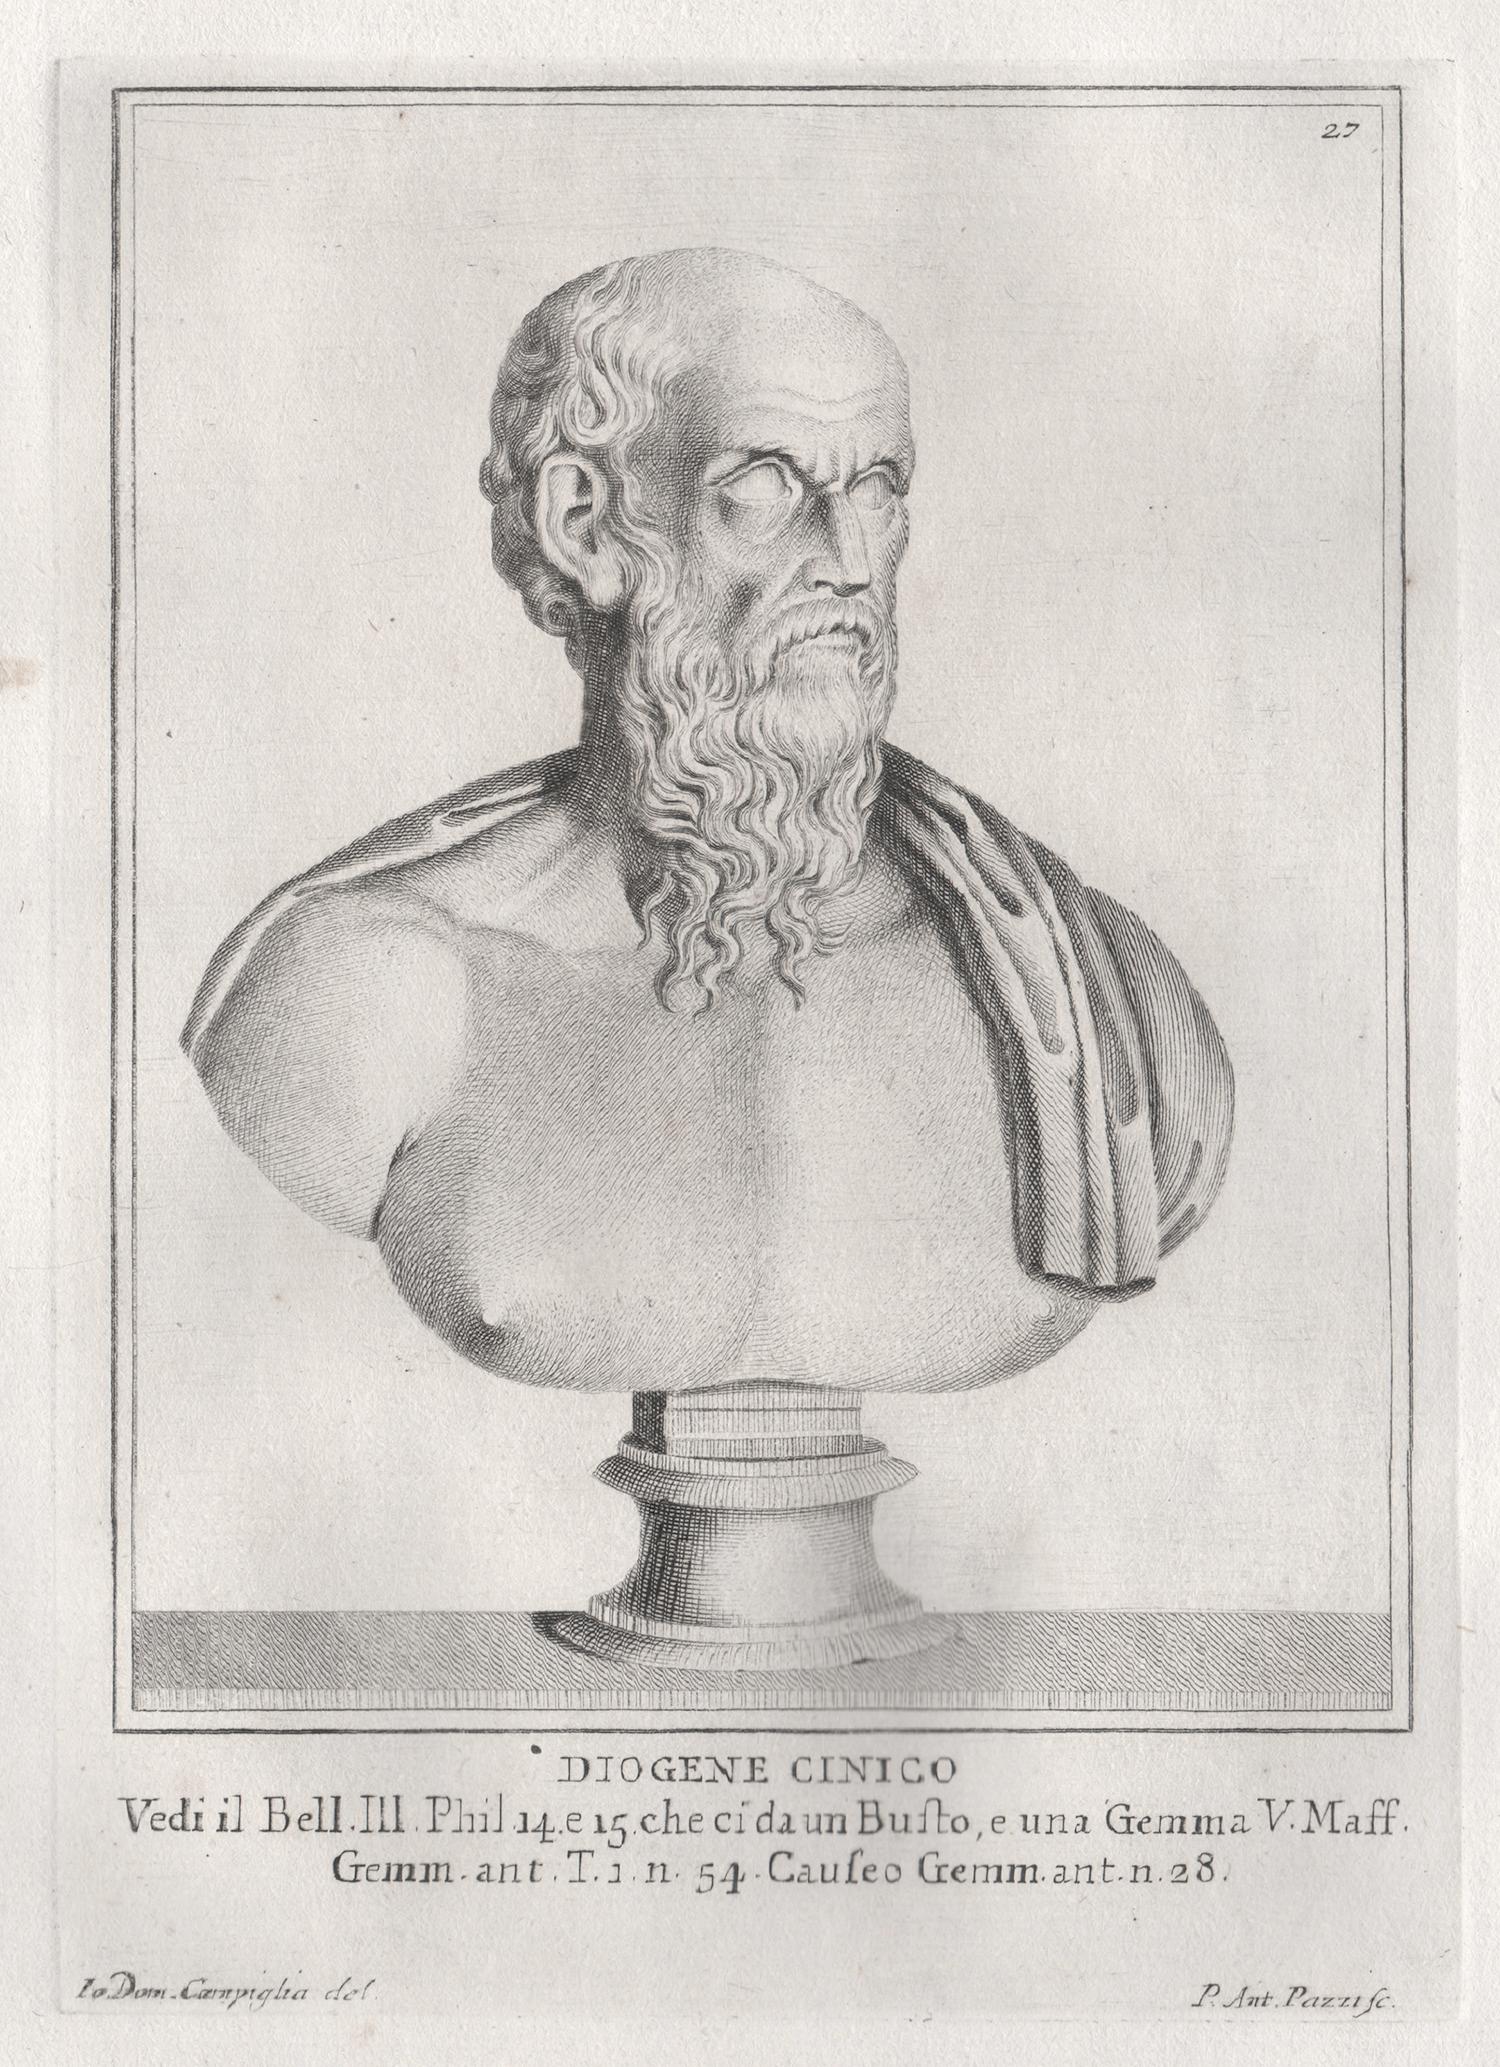 Diogenes the Cynic, Greek philosopher. C18th Grand Tour Roman bust engraving